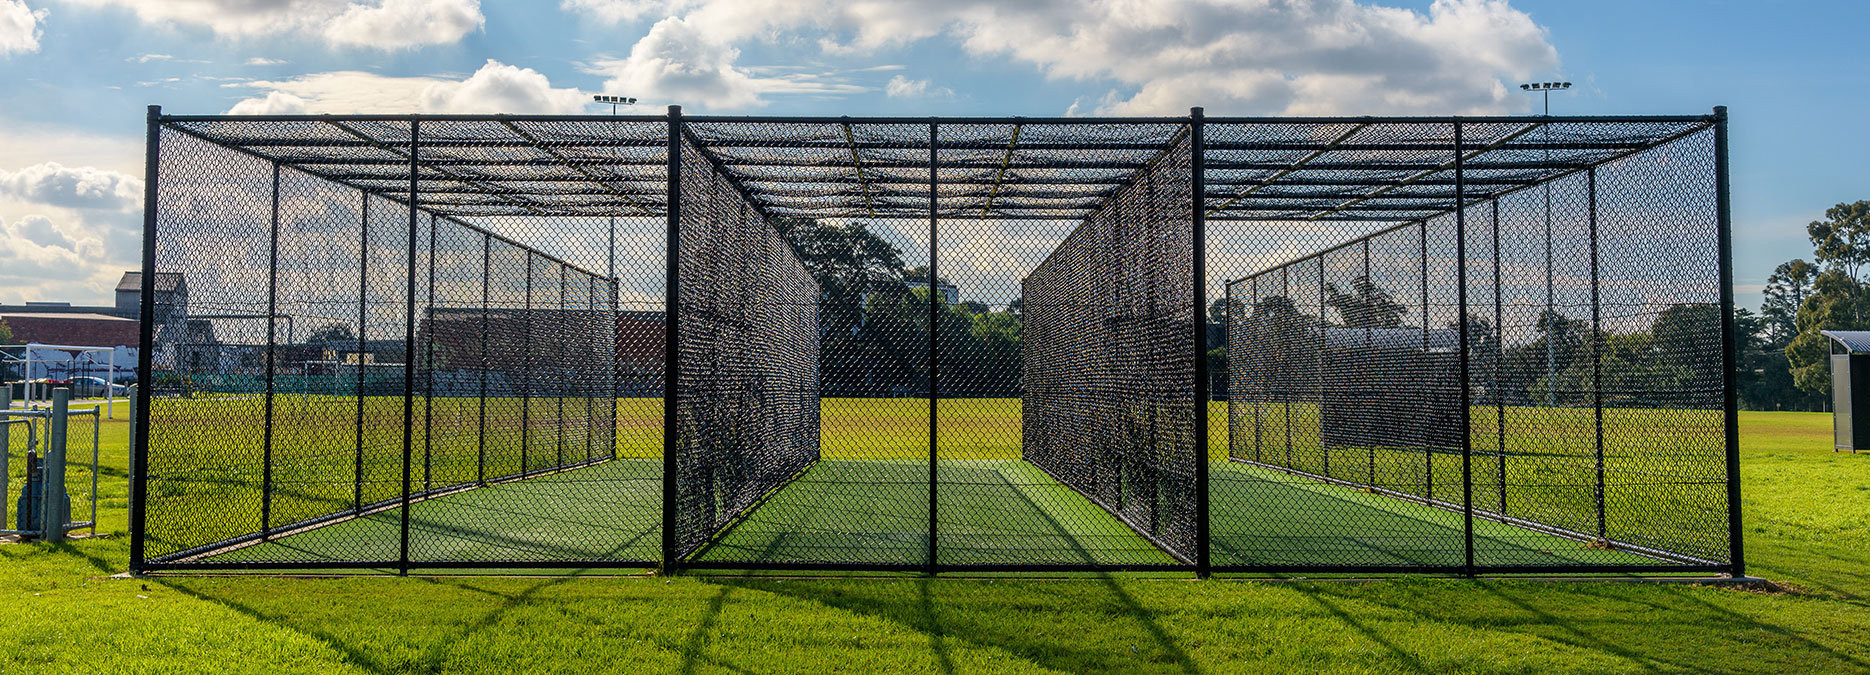 PROS AND CONS OF BATTING CAGES - Backyard Sports